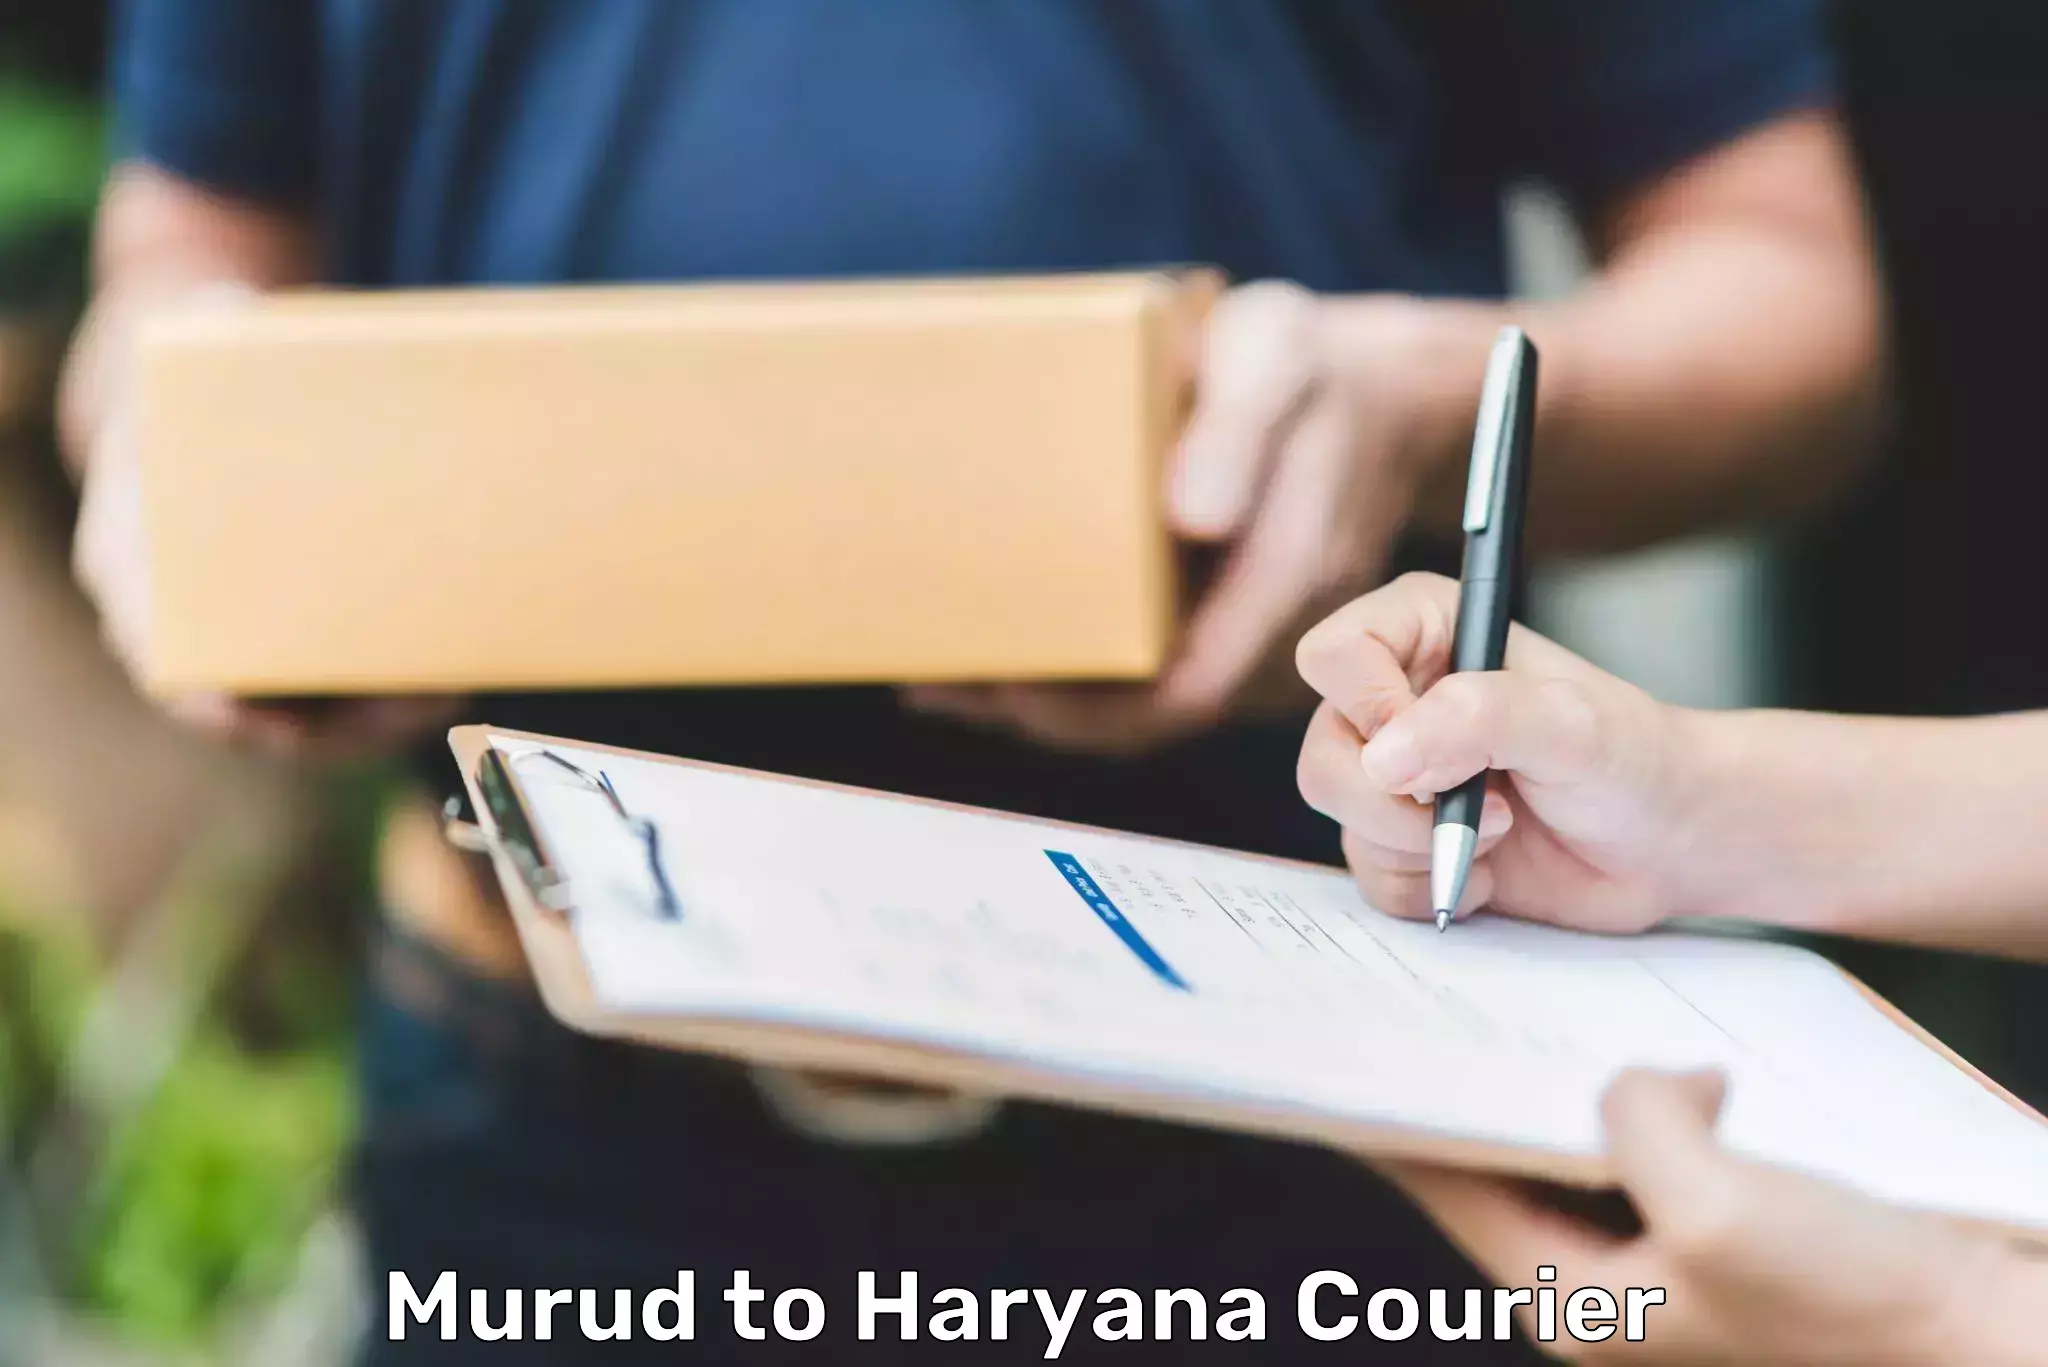 Express delivery network Murud to Haryana